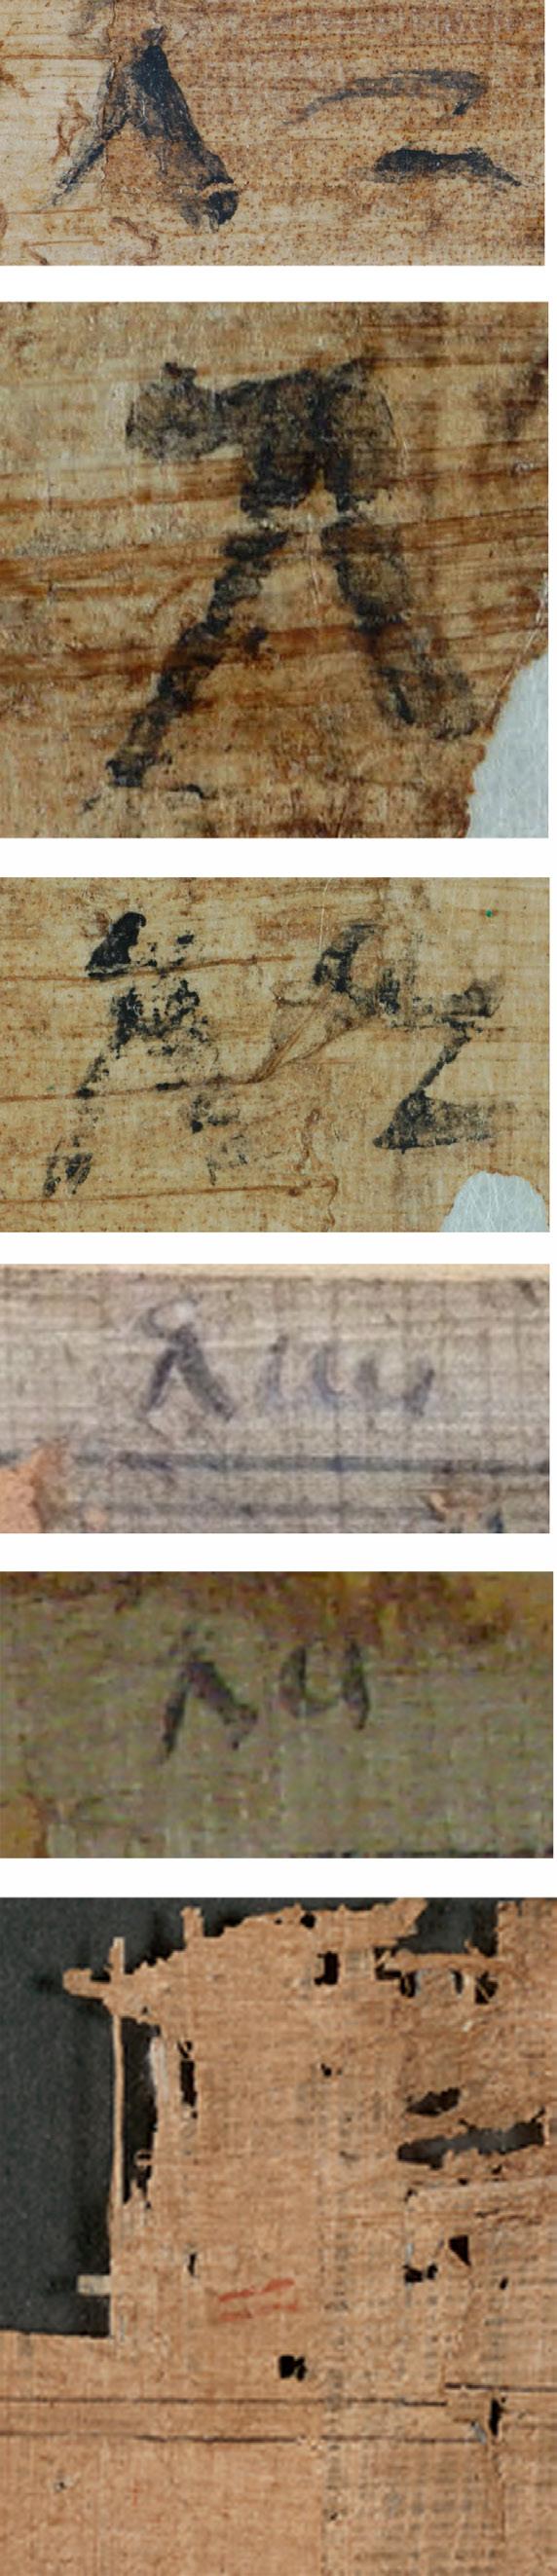 HELEN SHARP Fig. 1: P.BM EA9913.1; Hieratic number on upper margin. Fig. 2: P.BM EA9913.2; Hieratic number on upper margin. Fig. 3: P.BM EA9913.3; Hieratic number on upper margin.